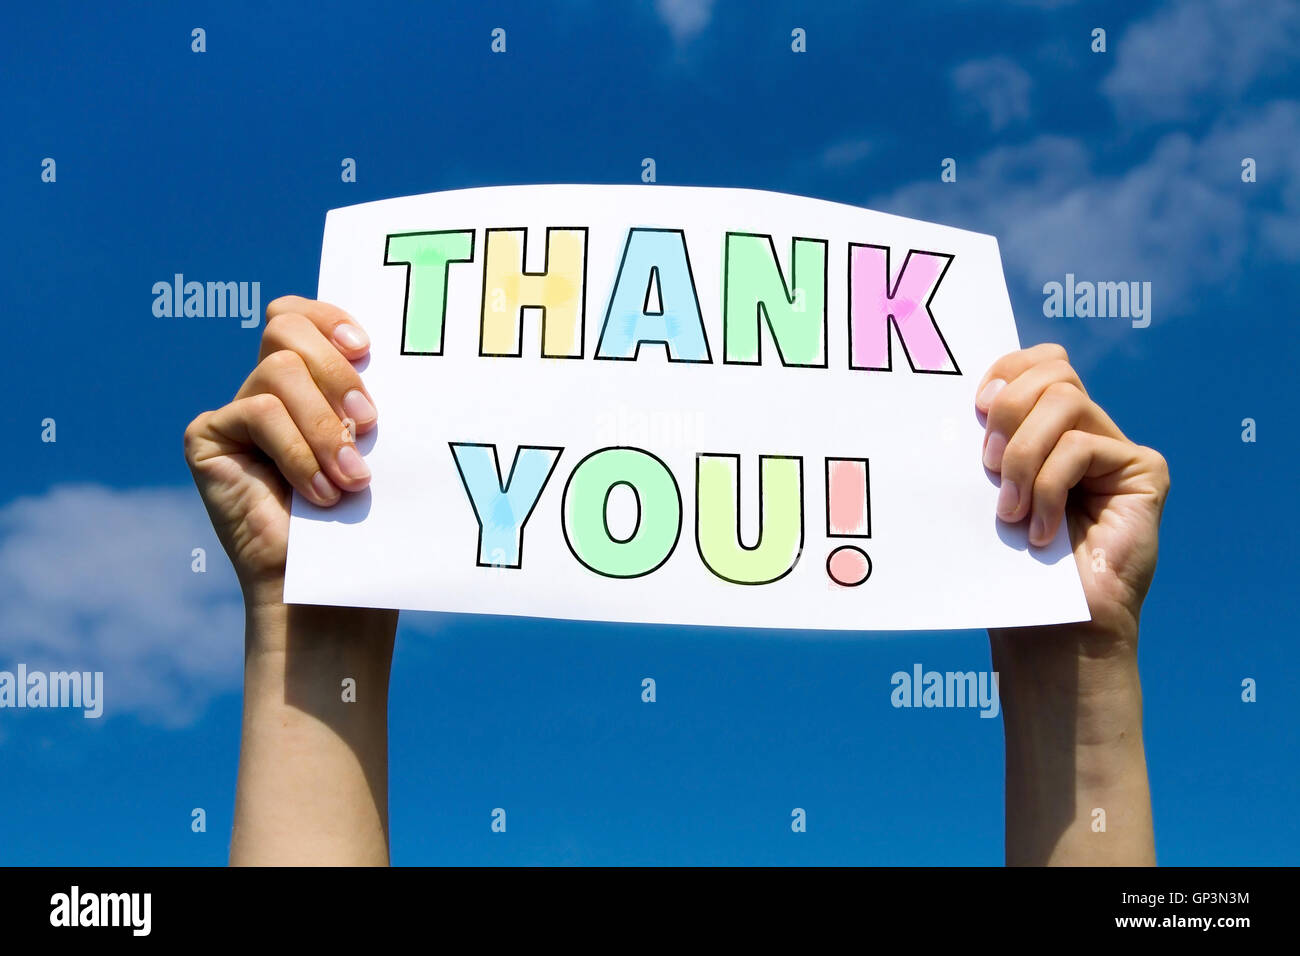 thank you, concept, colorful sign Stock Photo